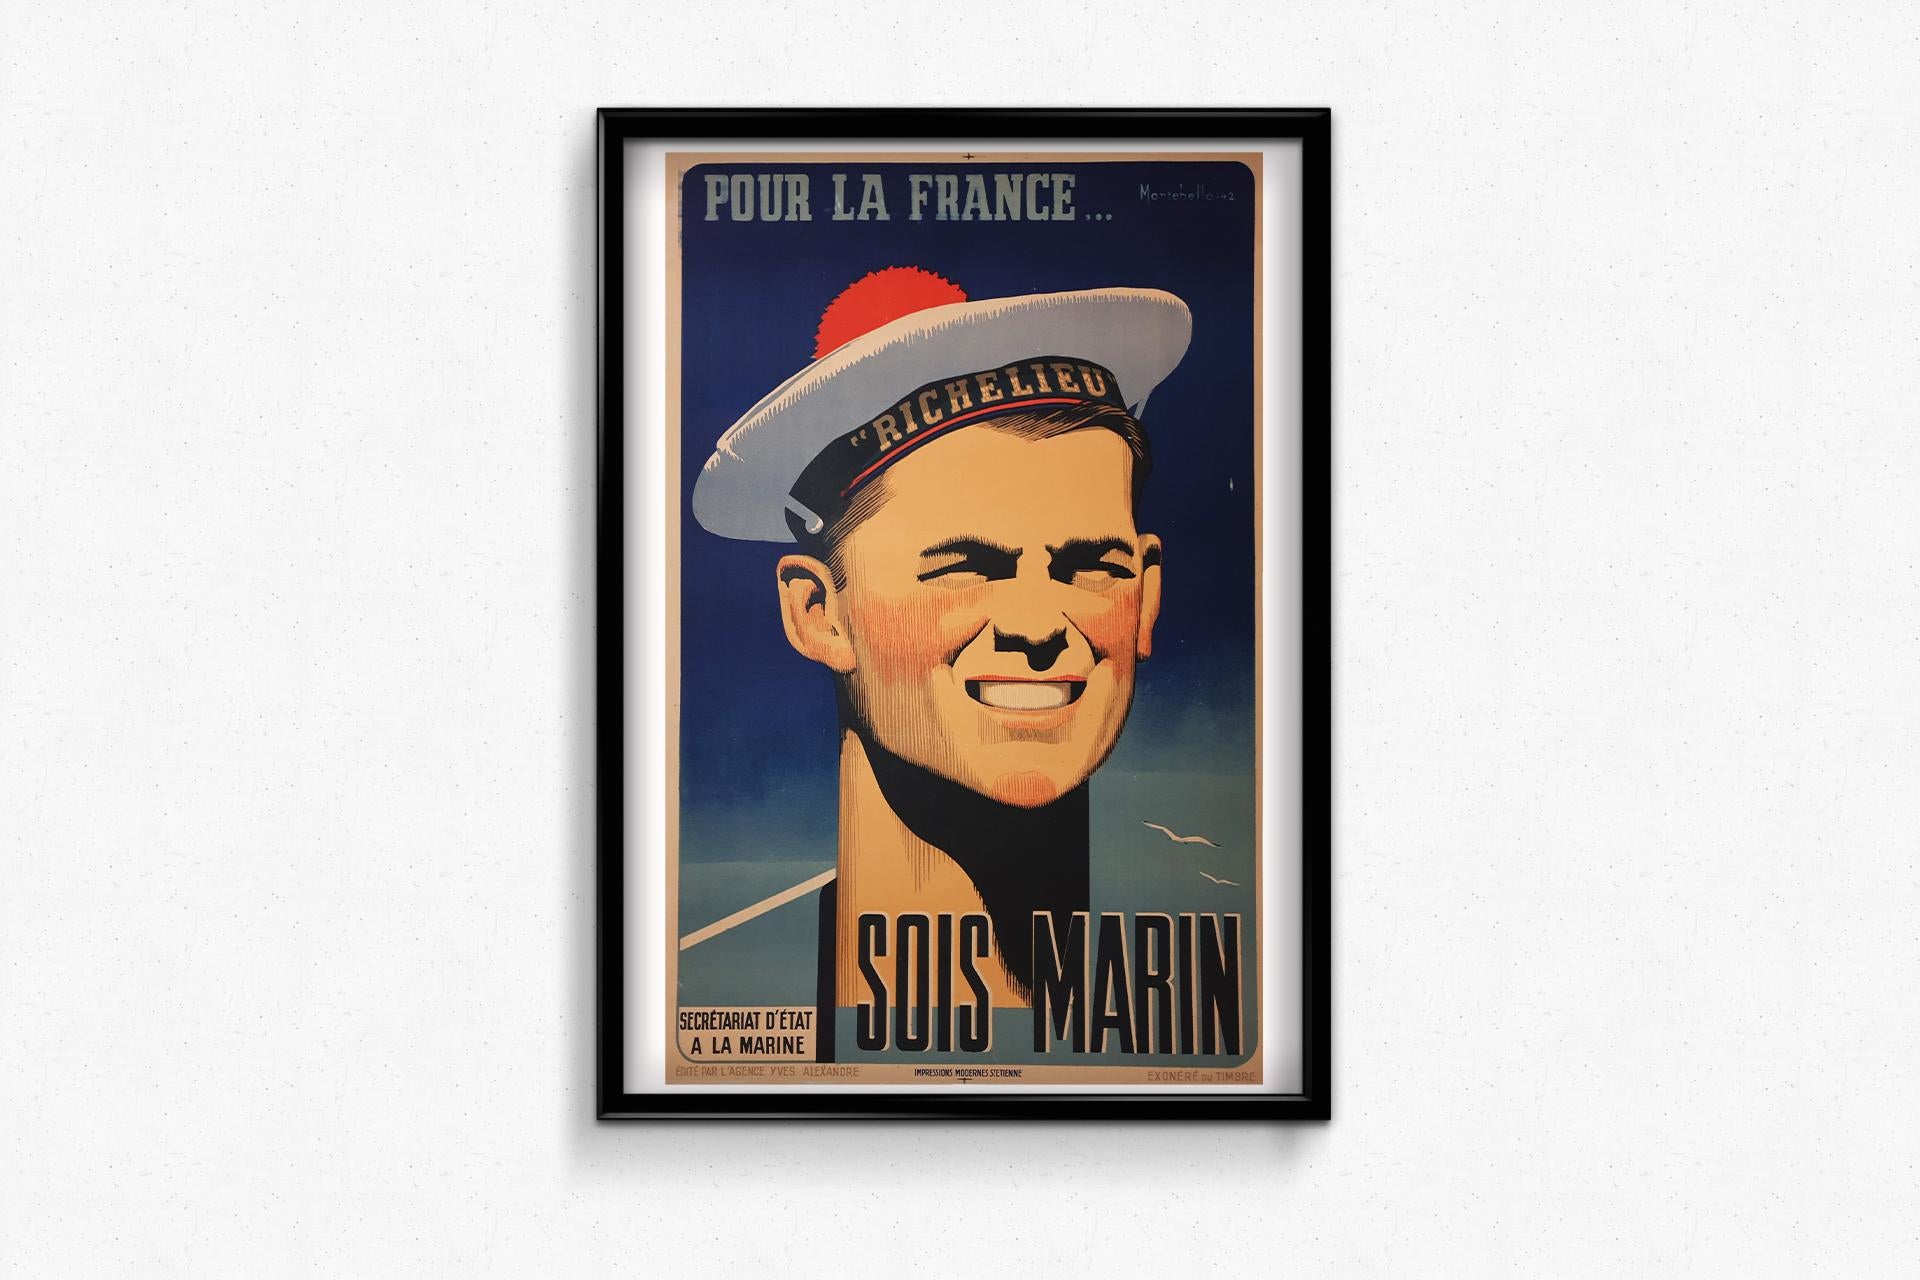 An original poster made in 1942, in the middle of the World War when France was partly occupied. The war effort had to be supported and all the communication levers were used.

On this sublime poster calling on French citizens to join the navy, we